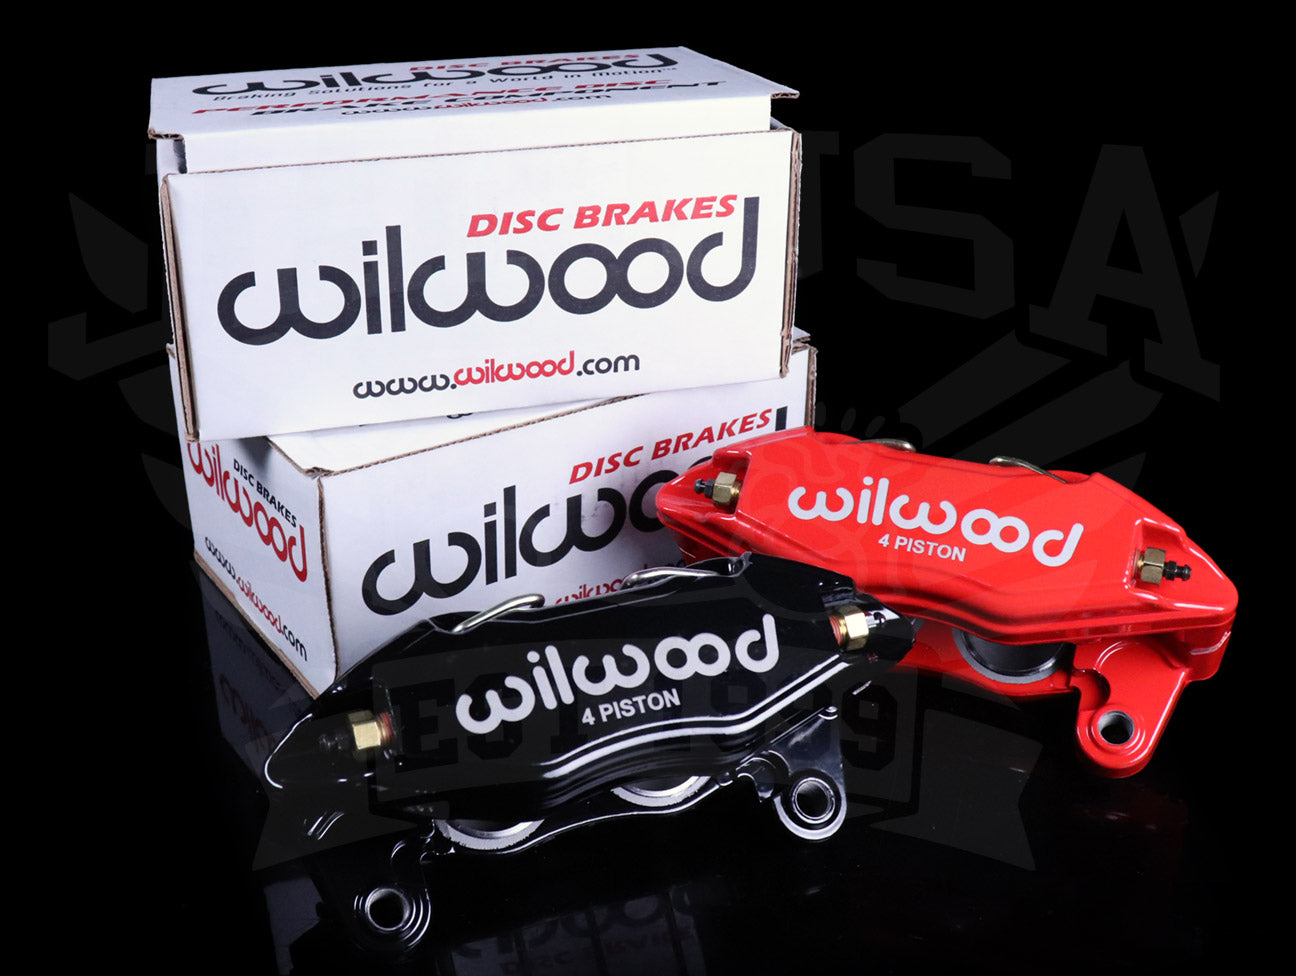 Wilwood Direct Bolt-On DPHA Forged Front Calipers - Honda / Acura